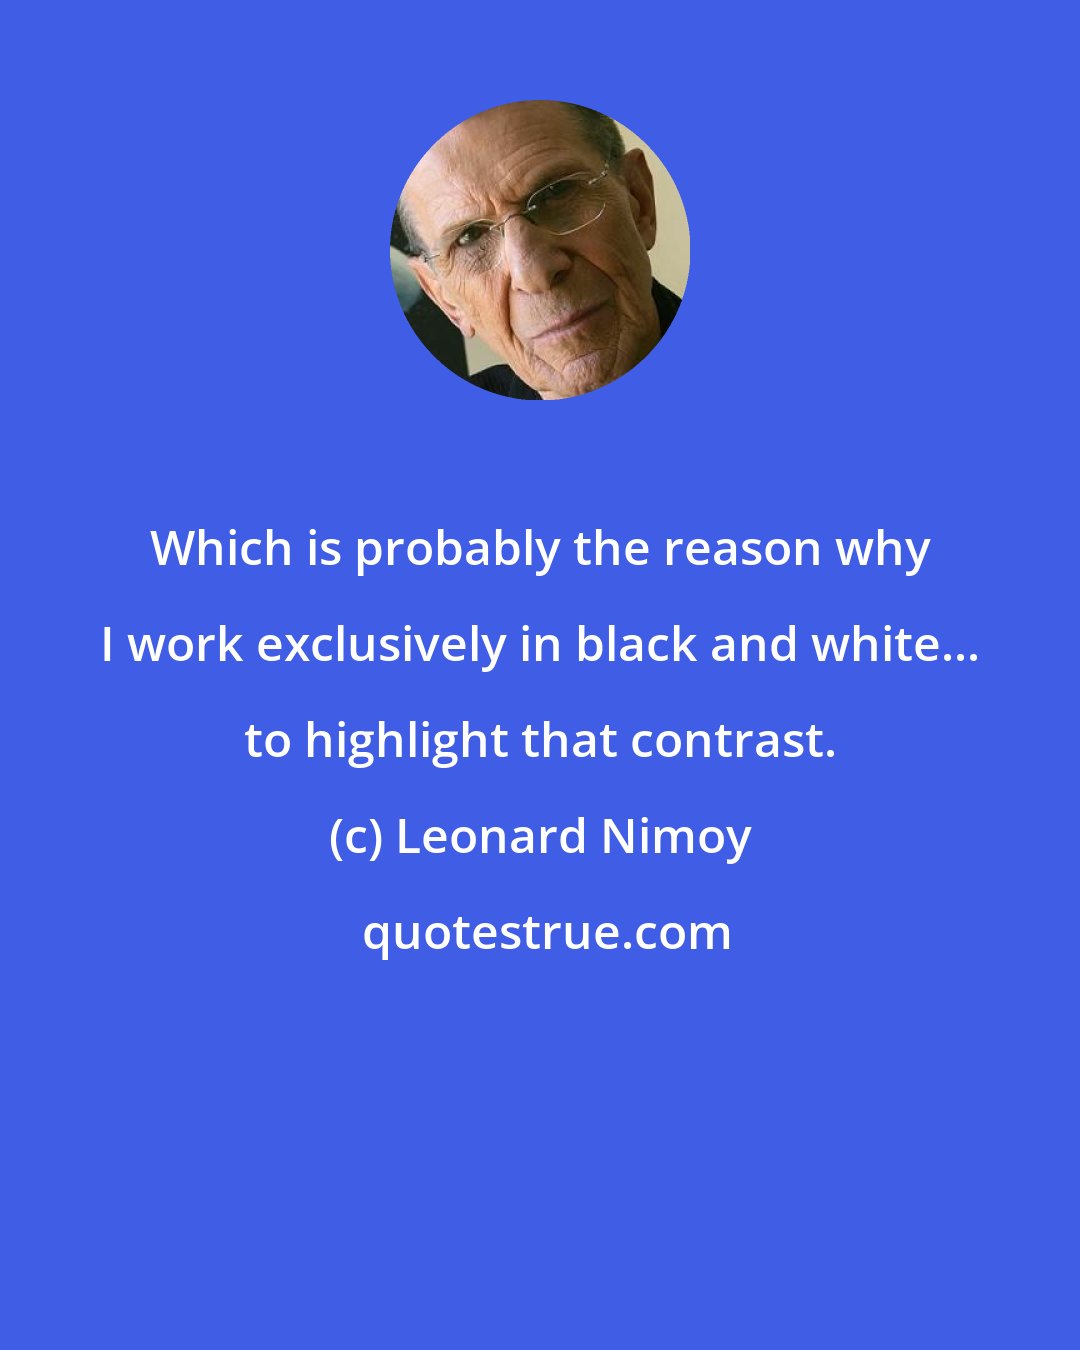 Leonard Nimoy: Which is probably the reason why I work exclusively in black and white... to highlight that contrast.